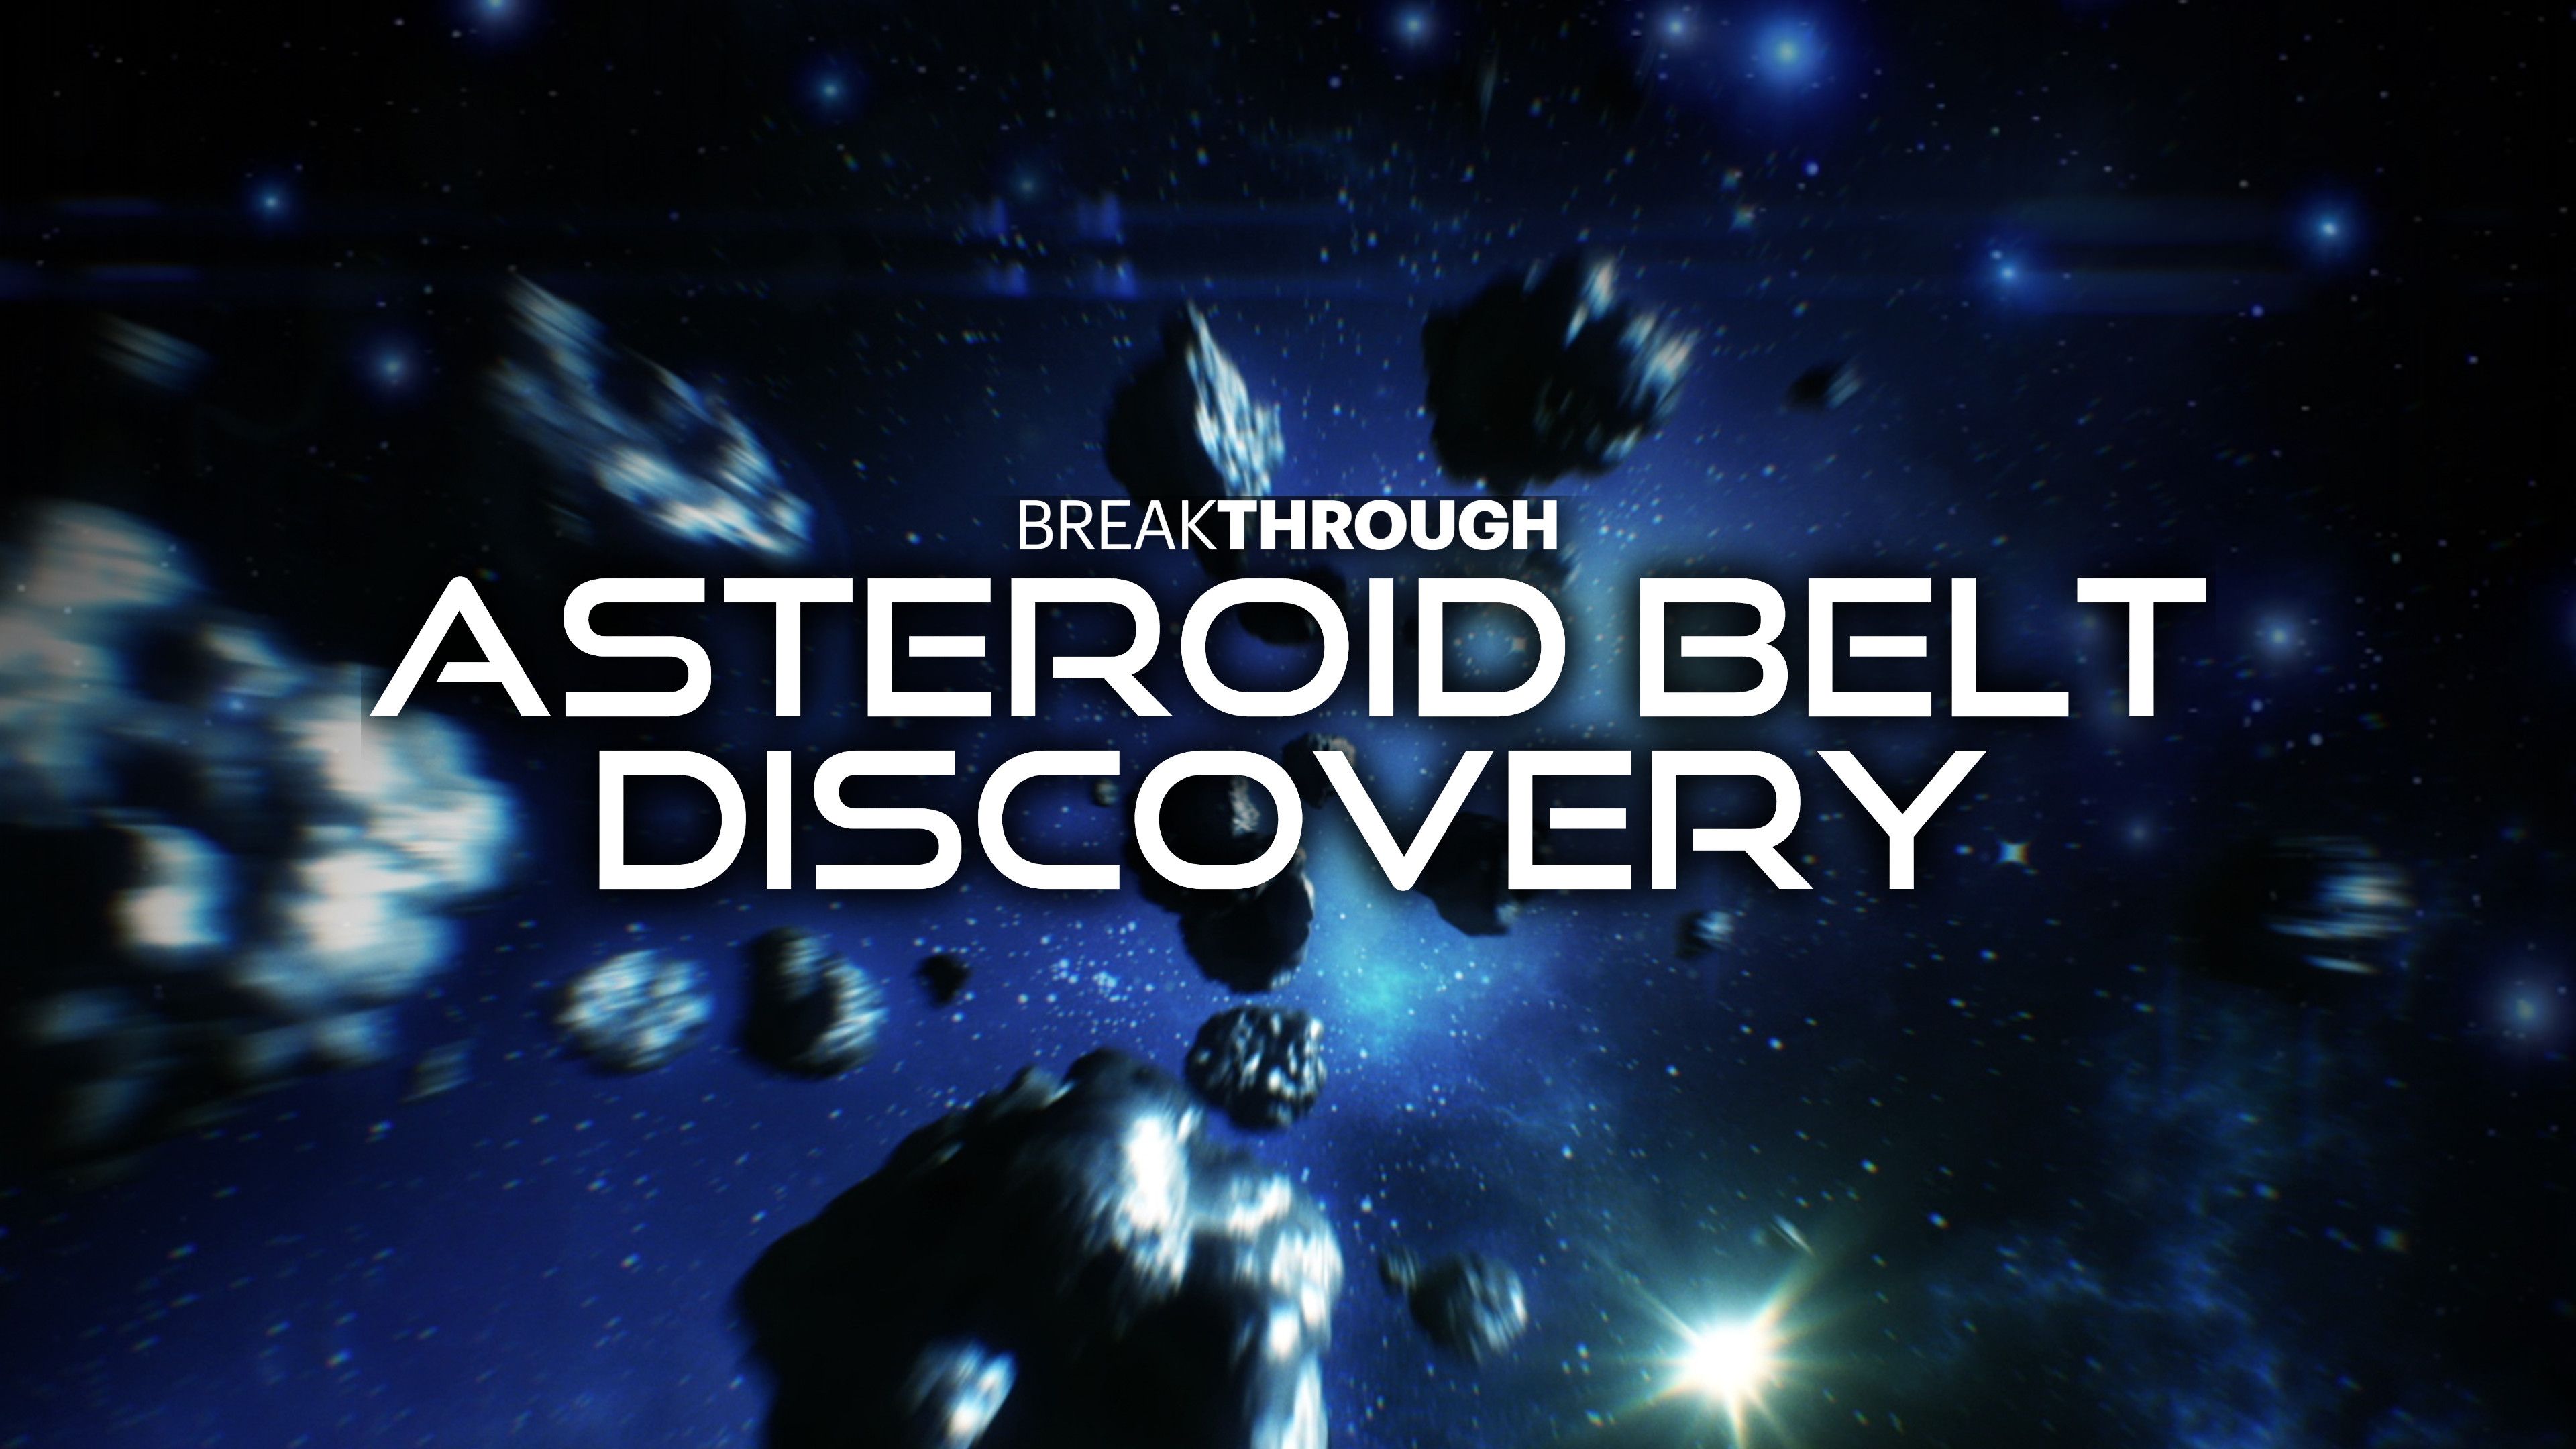 Asteroid Belt Discovery